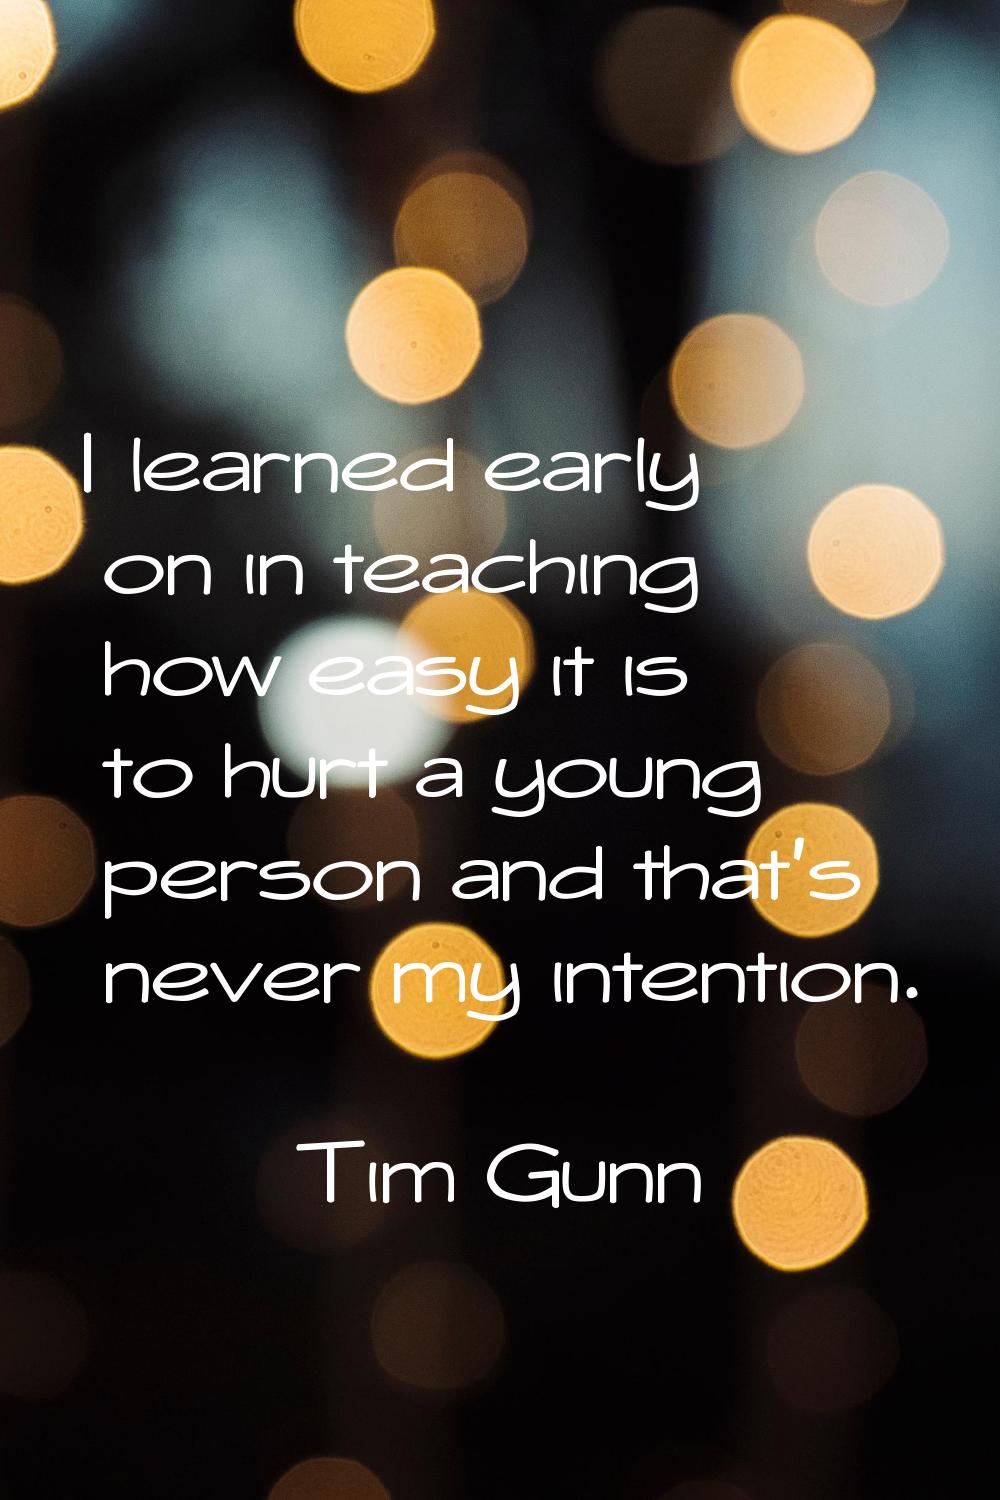 I learned early on in teaching how easy it is to hurt a young person and that's never my intention.